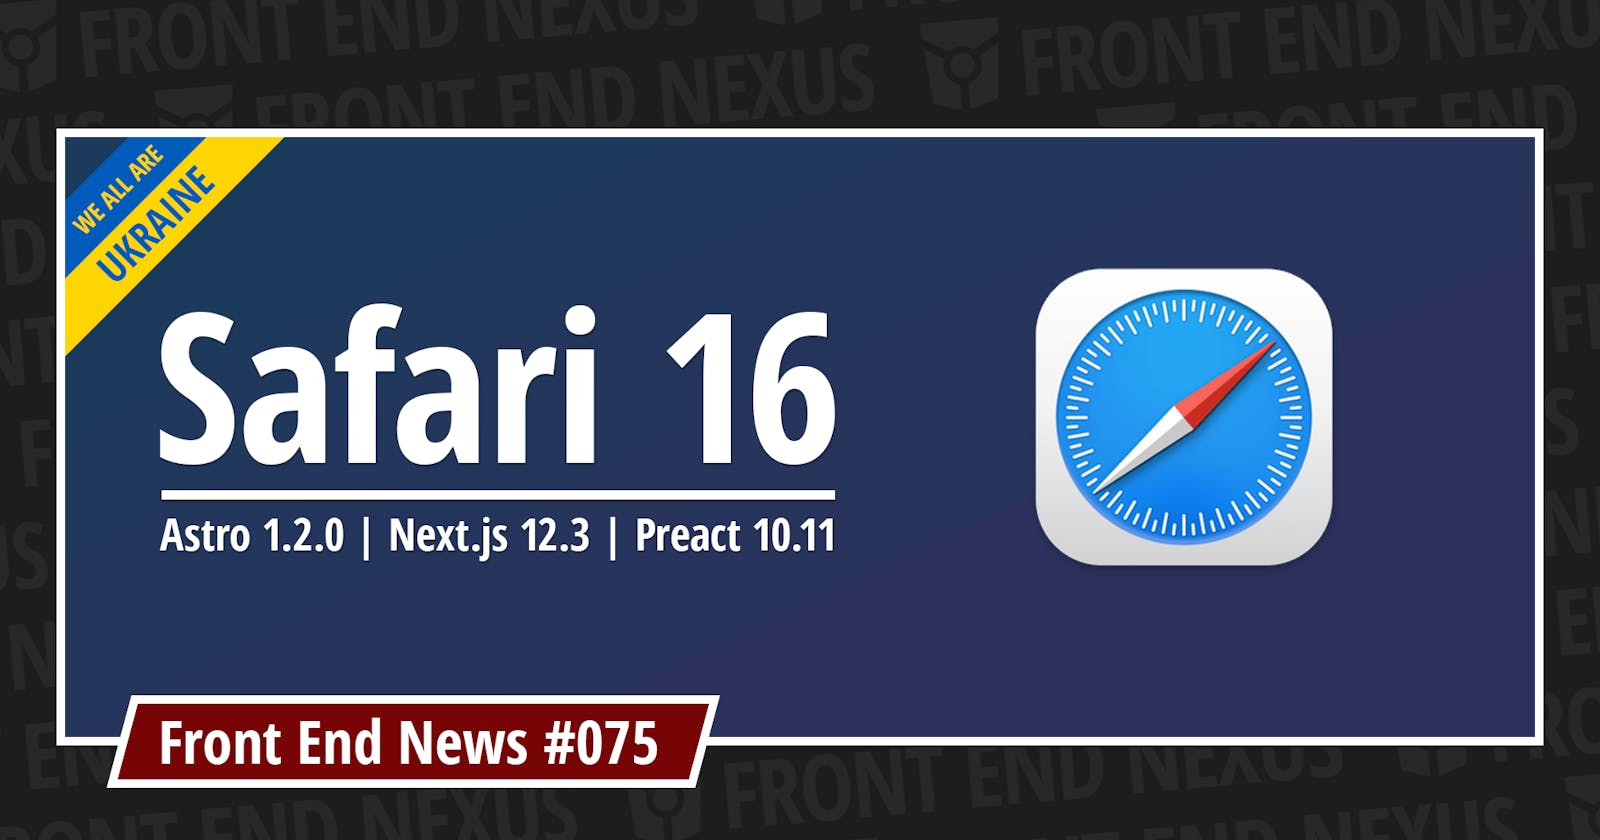 Safari 16.0 is out, Astro 1.2.0, Next.js 12.3, Preact 10.11, and more | Front End News #075